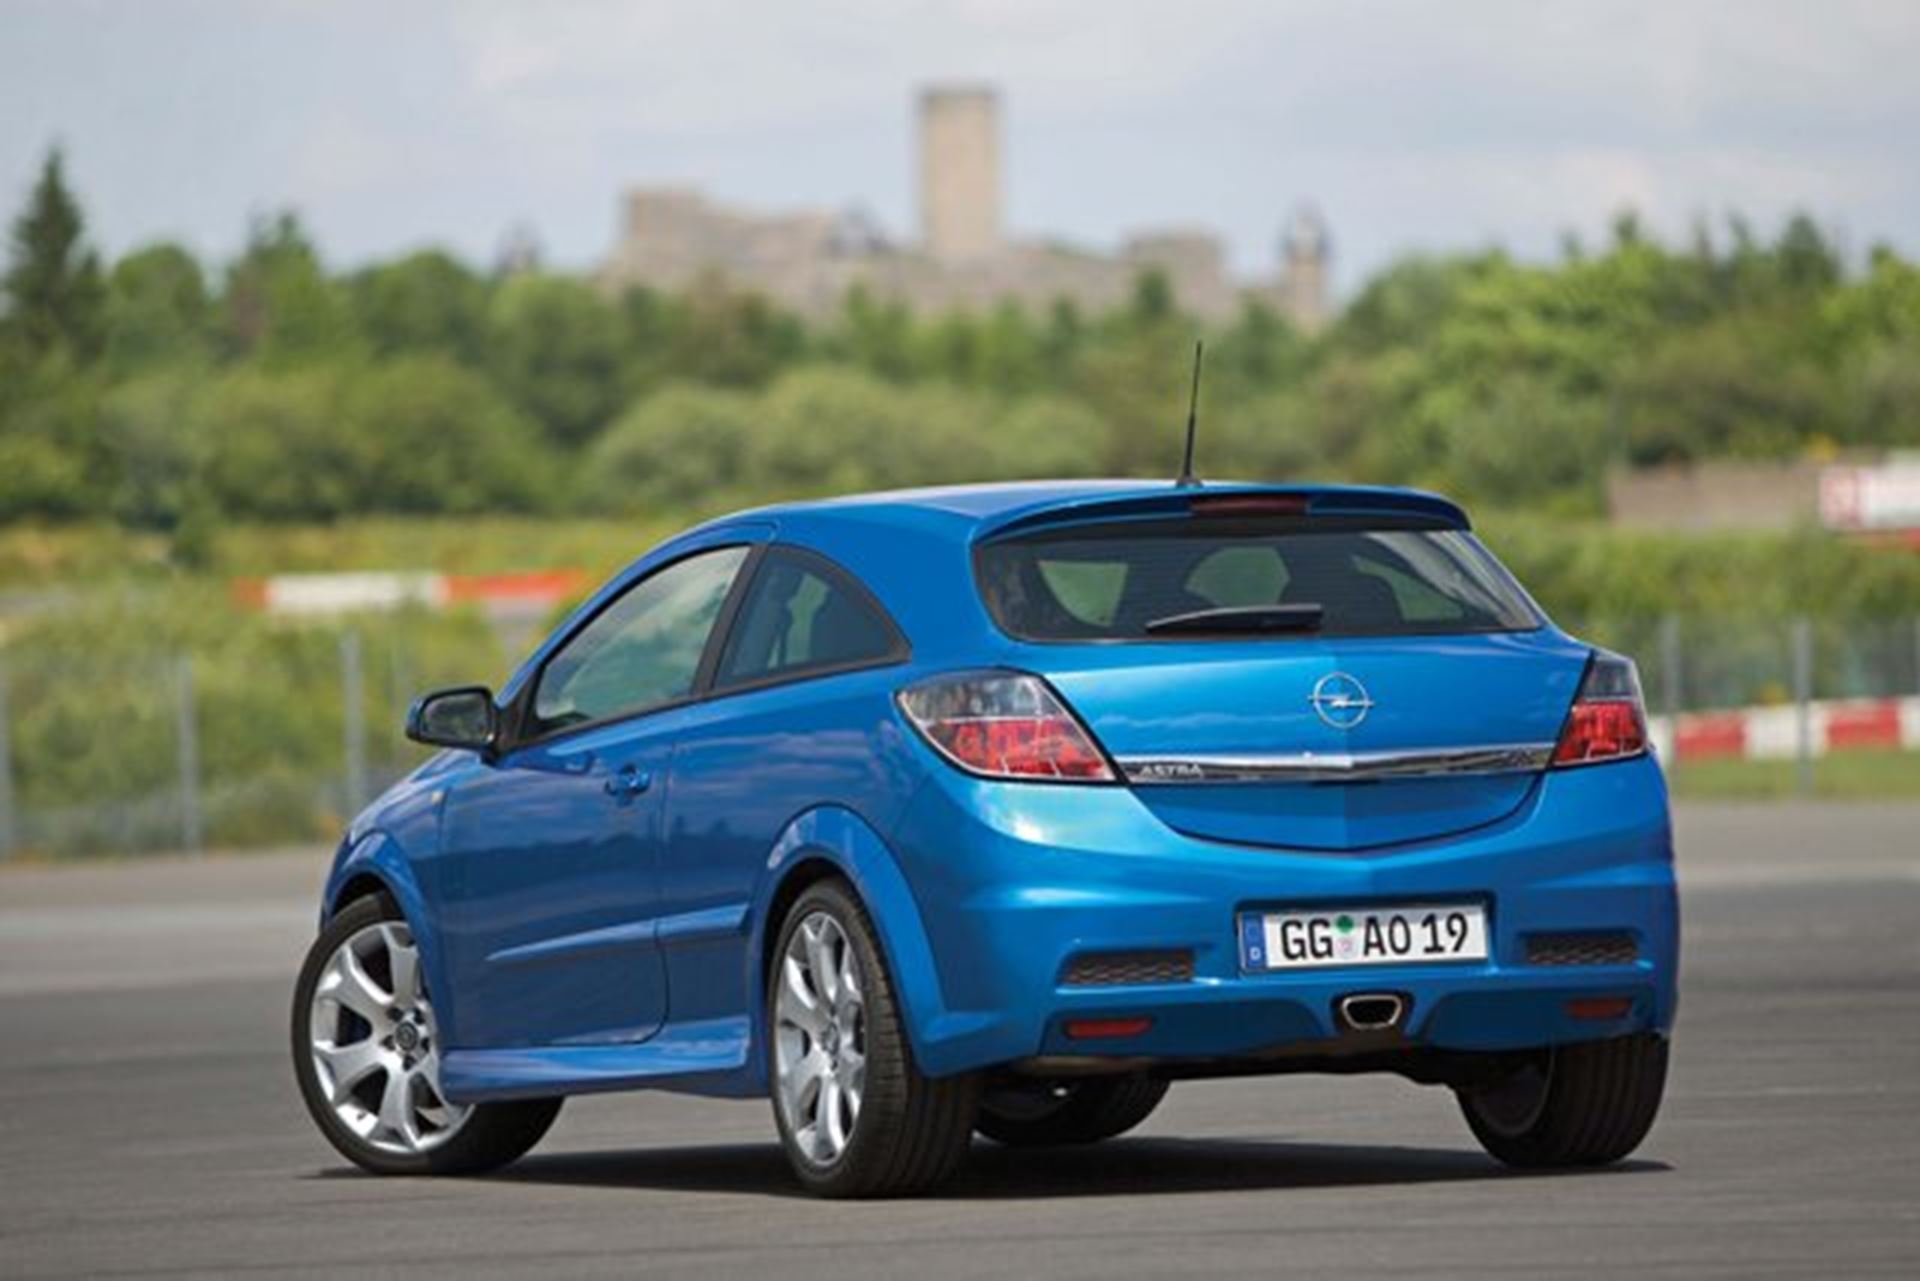 Astra OPC – Redefining the sports hatch.